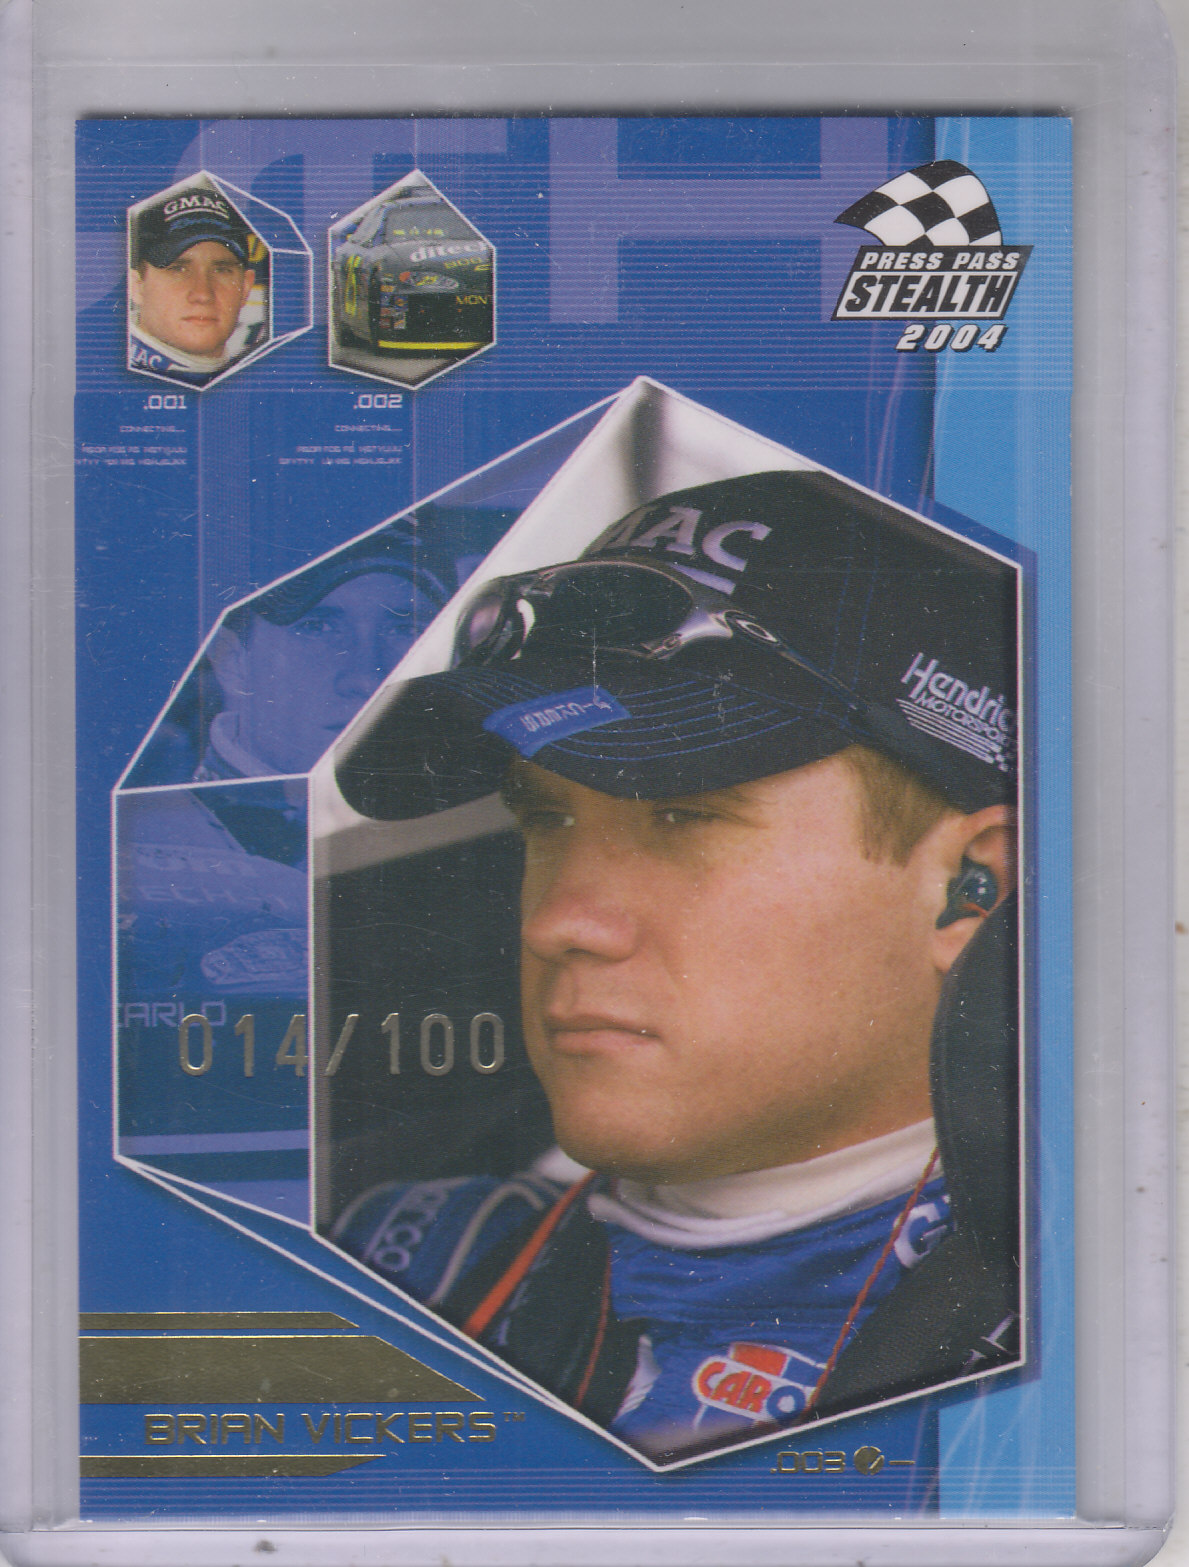 2004 Press Pass Stealth X-Ray #24 Brian Vickers